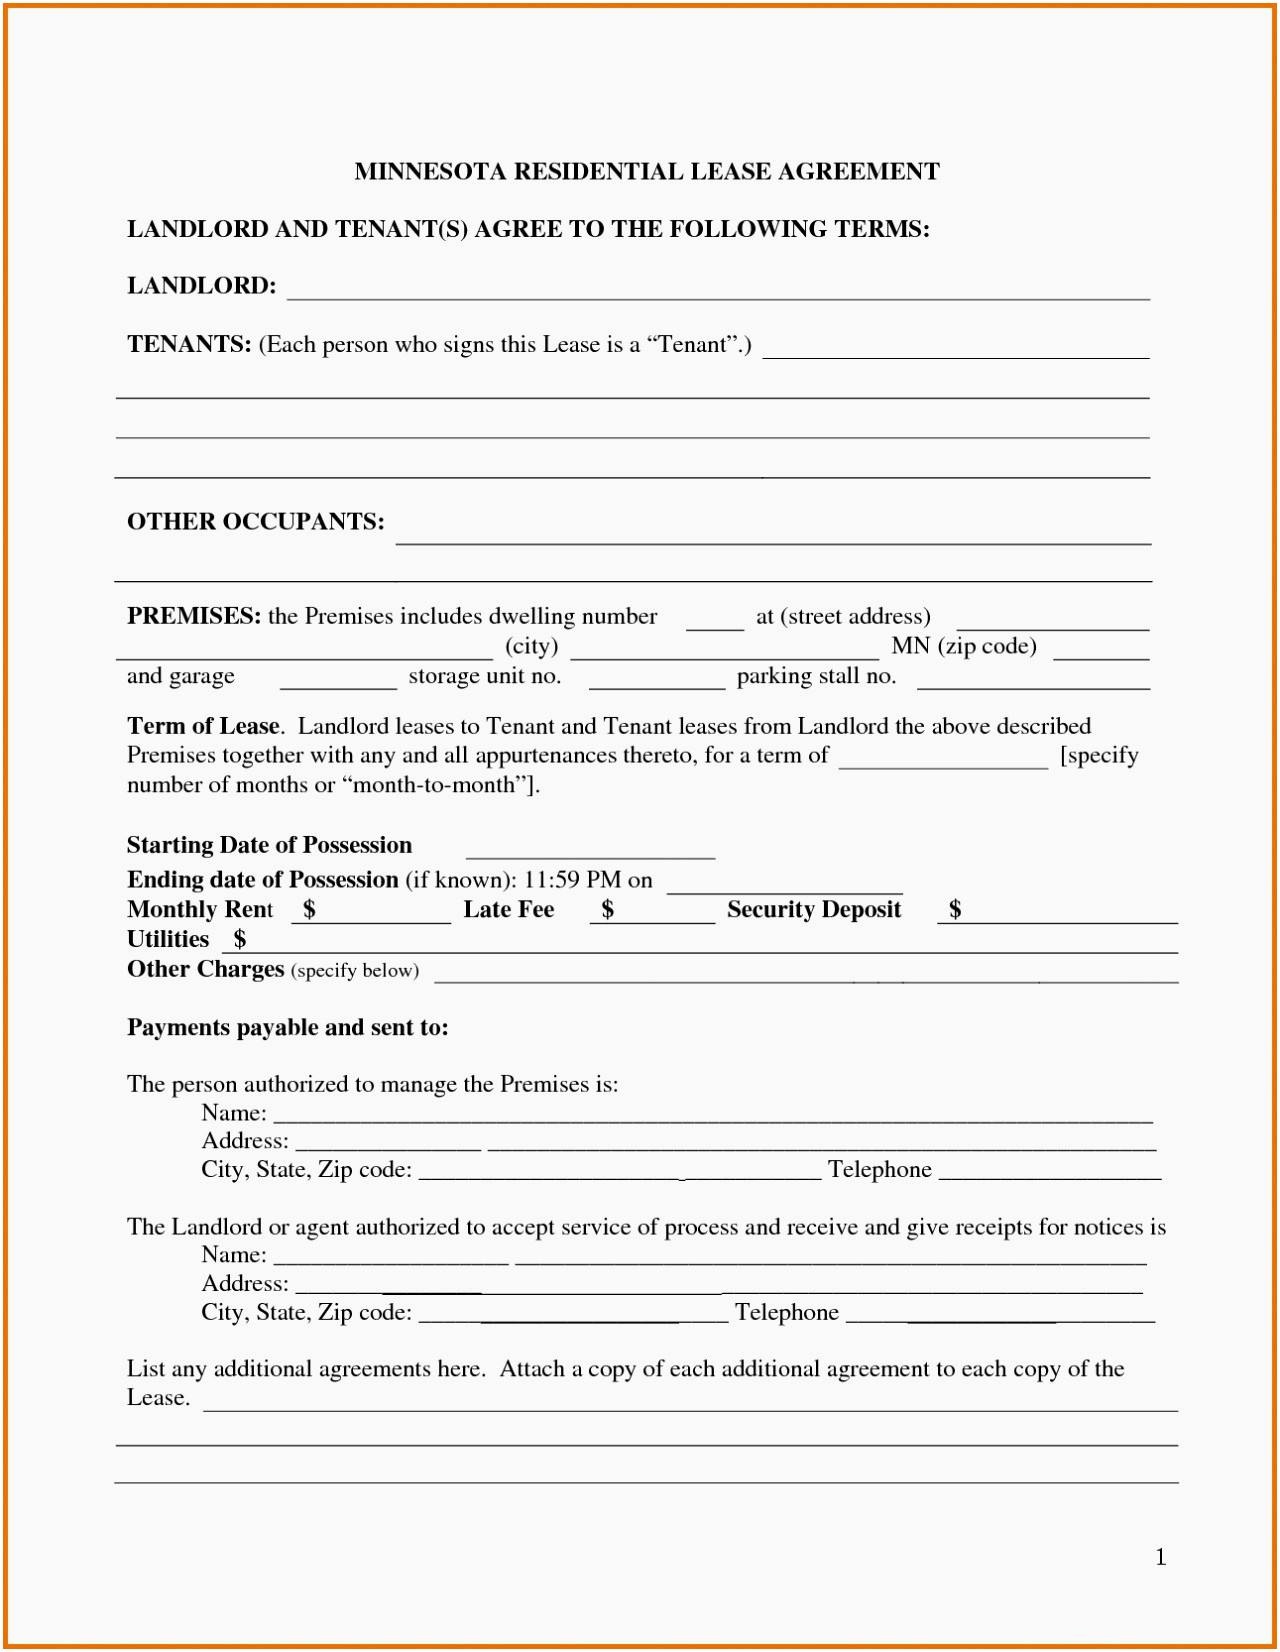 Free Motor Vehicle Lease Agreement Template